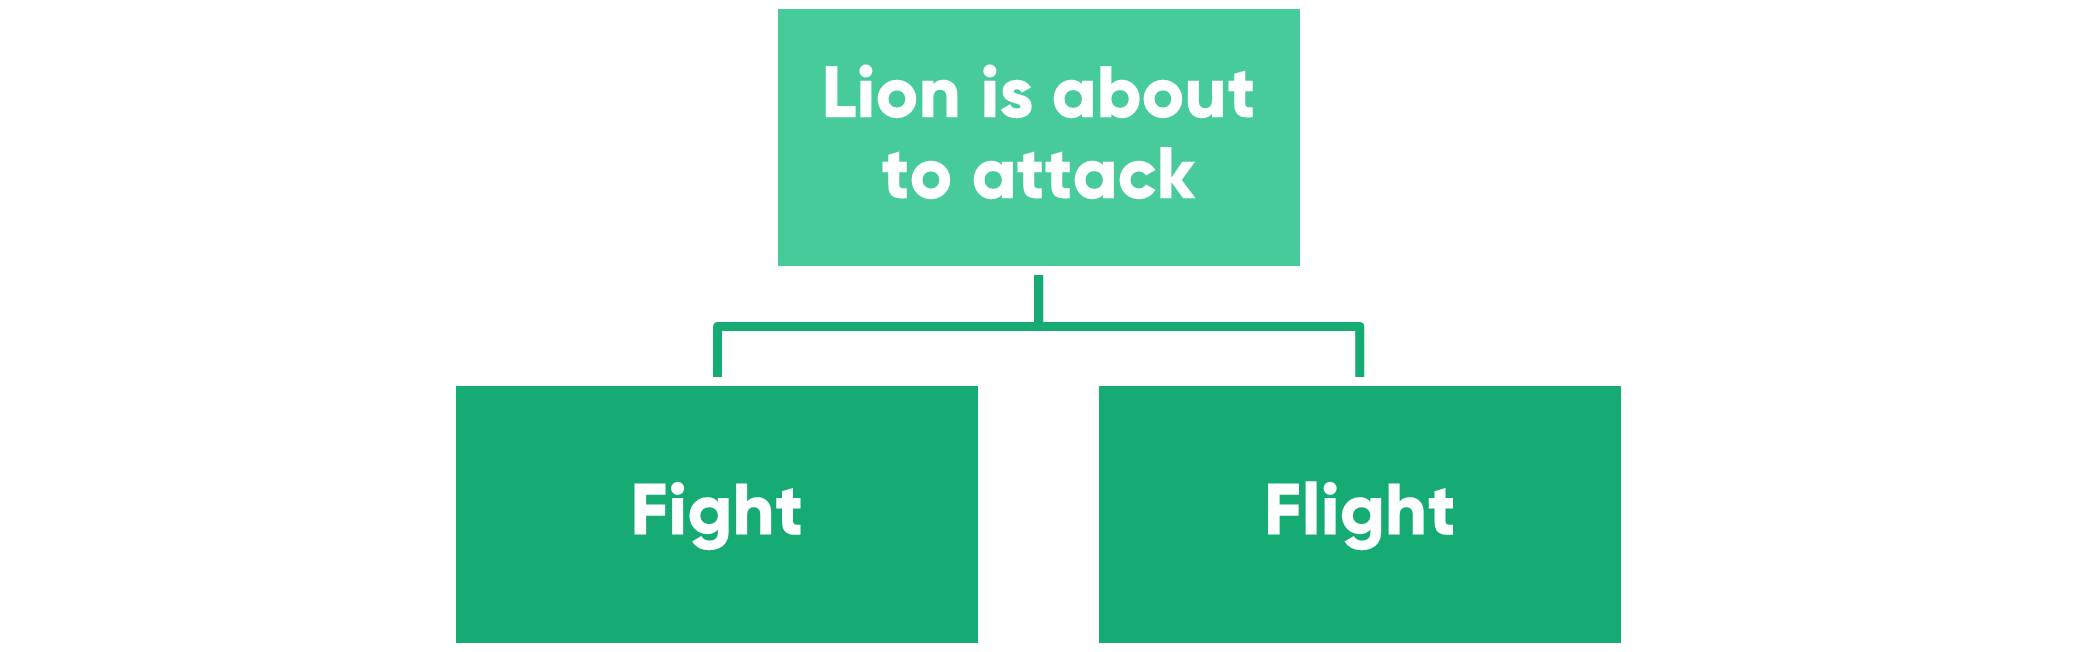 Cue is "Lion is about to attack", response is either "fight" or "flight"